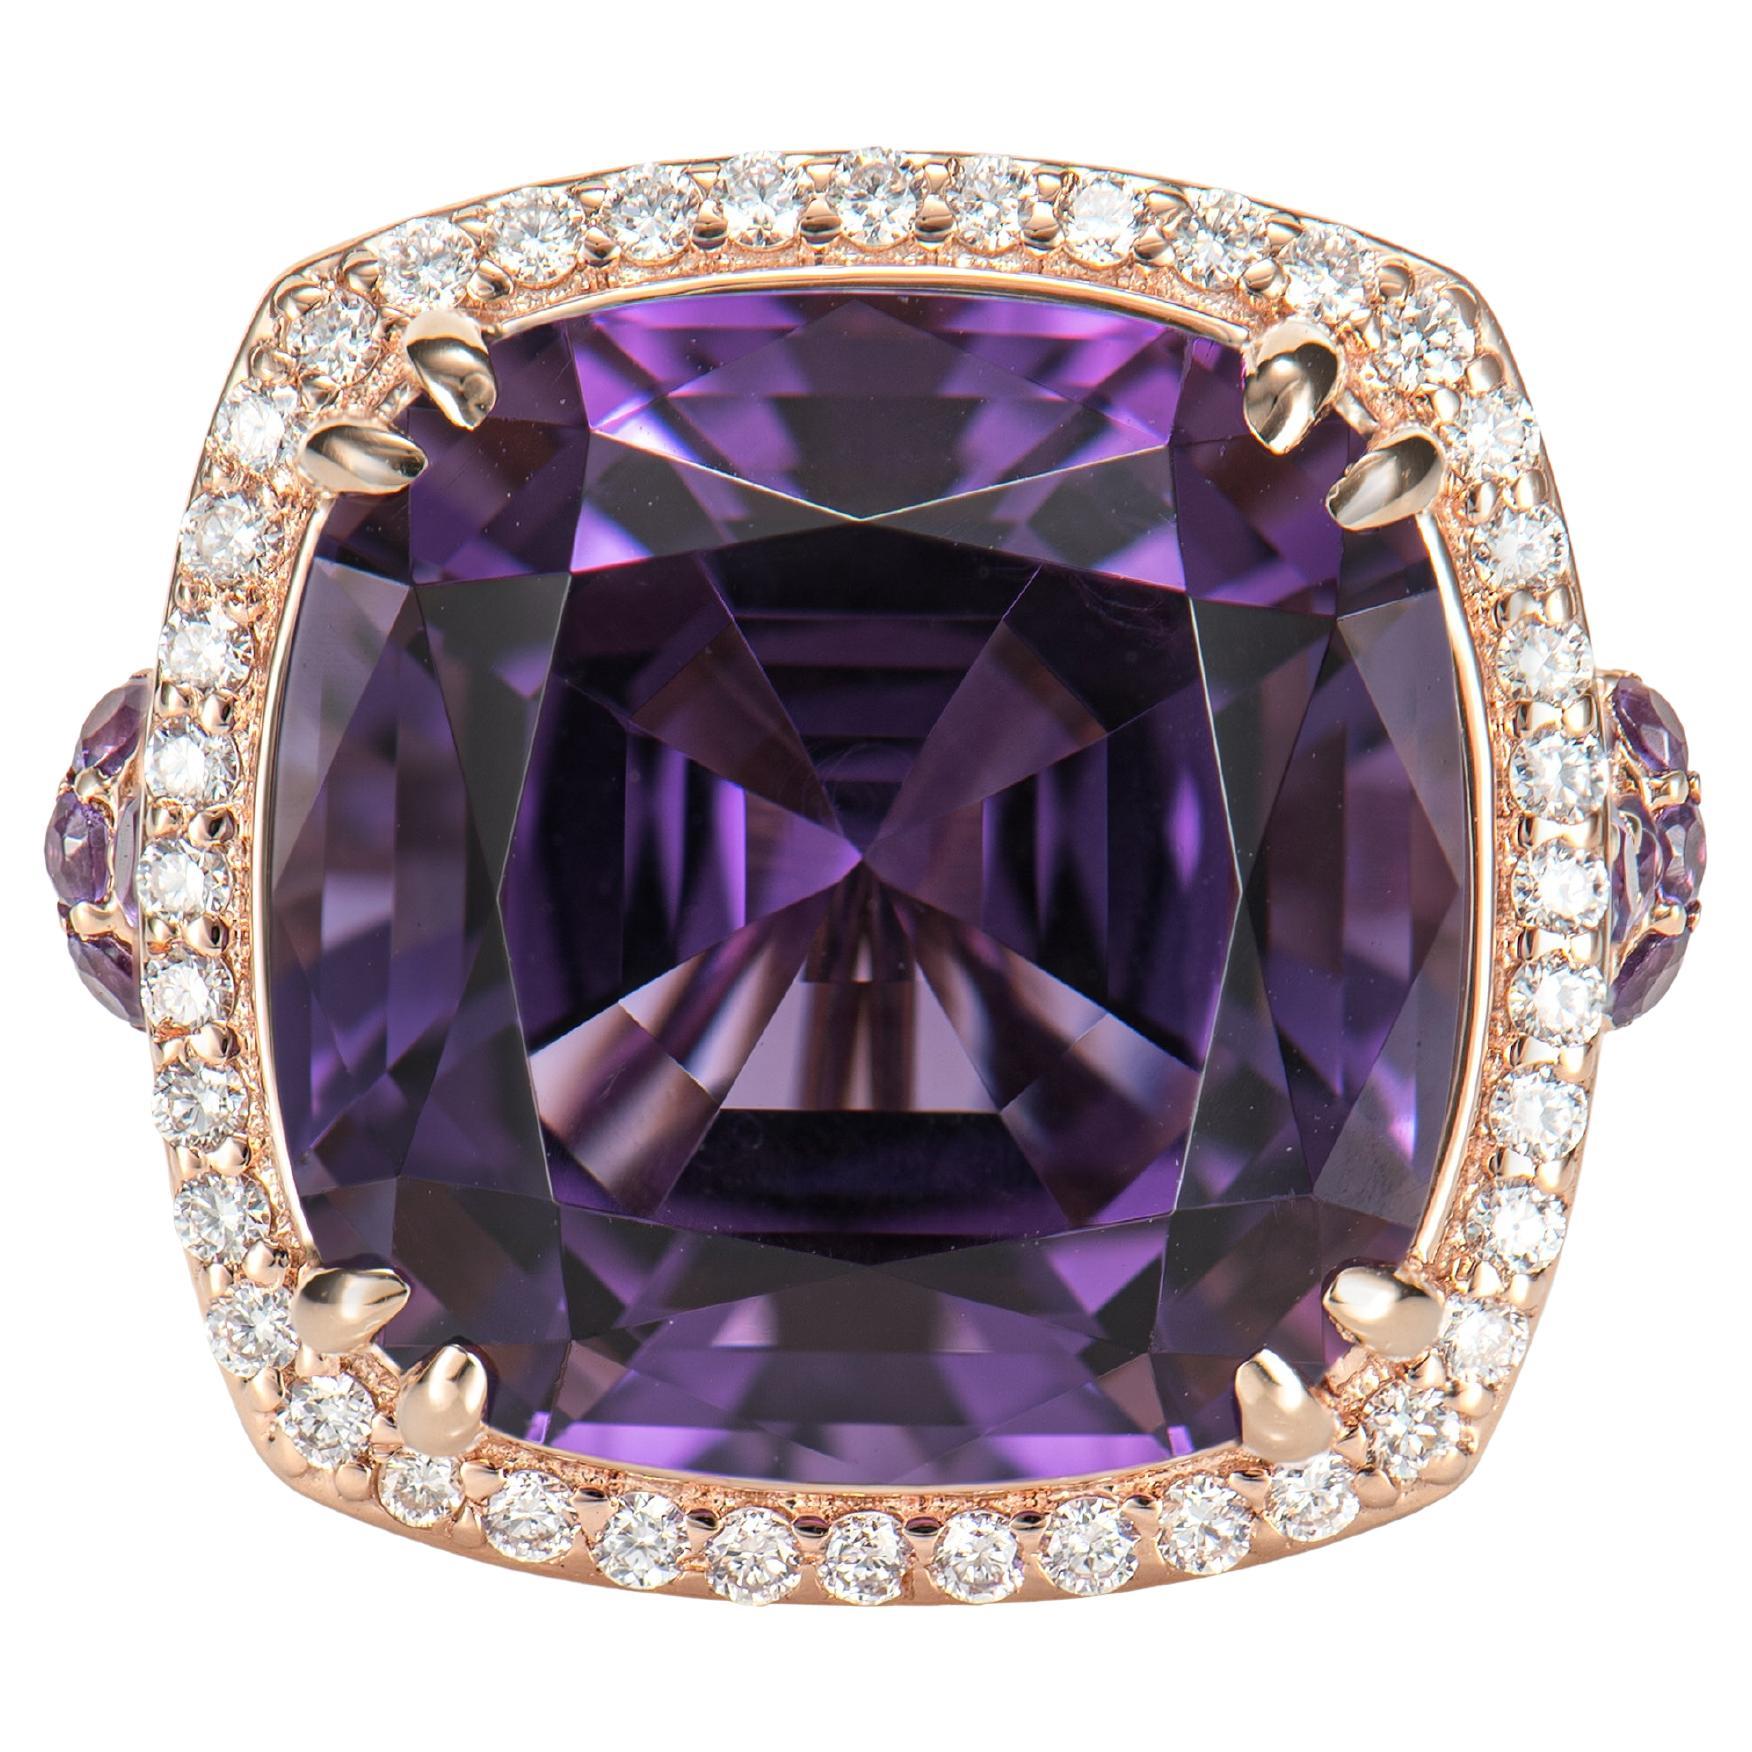 11.50 Carat Amethyst Cocktail Ring in 18 Karat Rose Gold with Diamond. For Sale